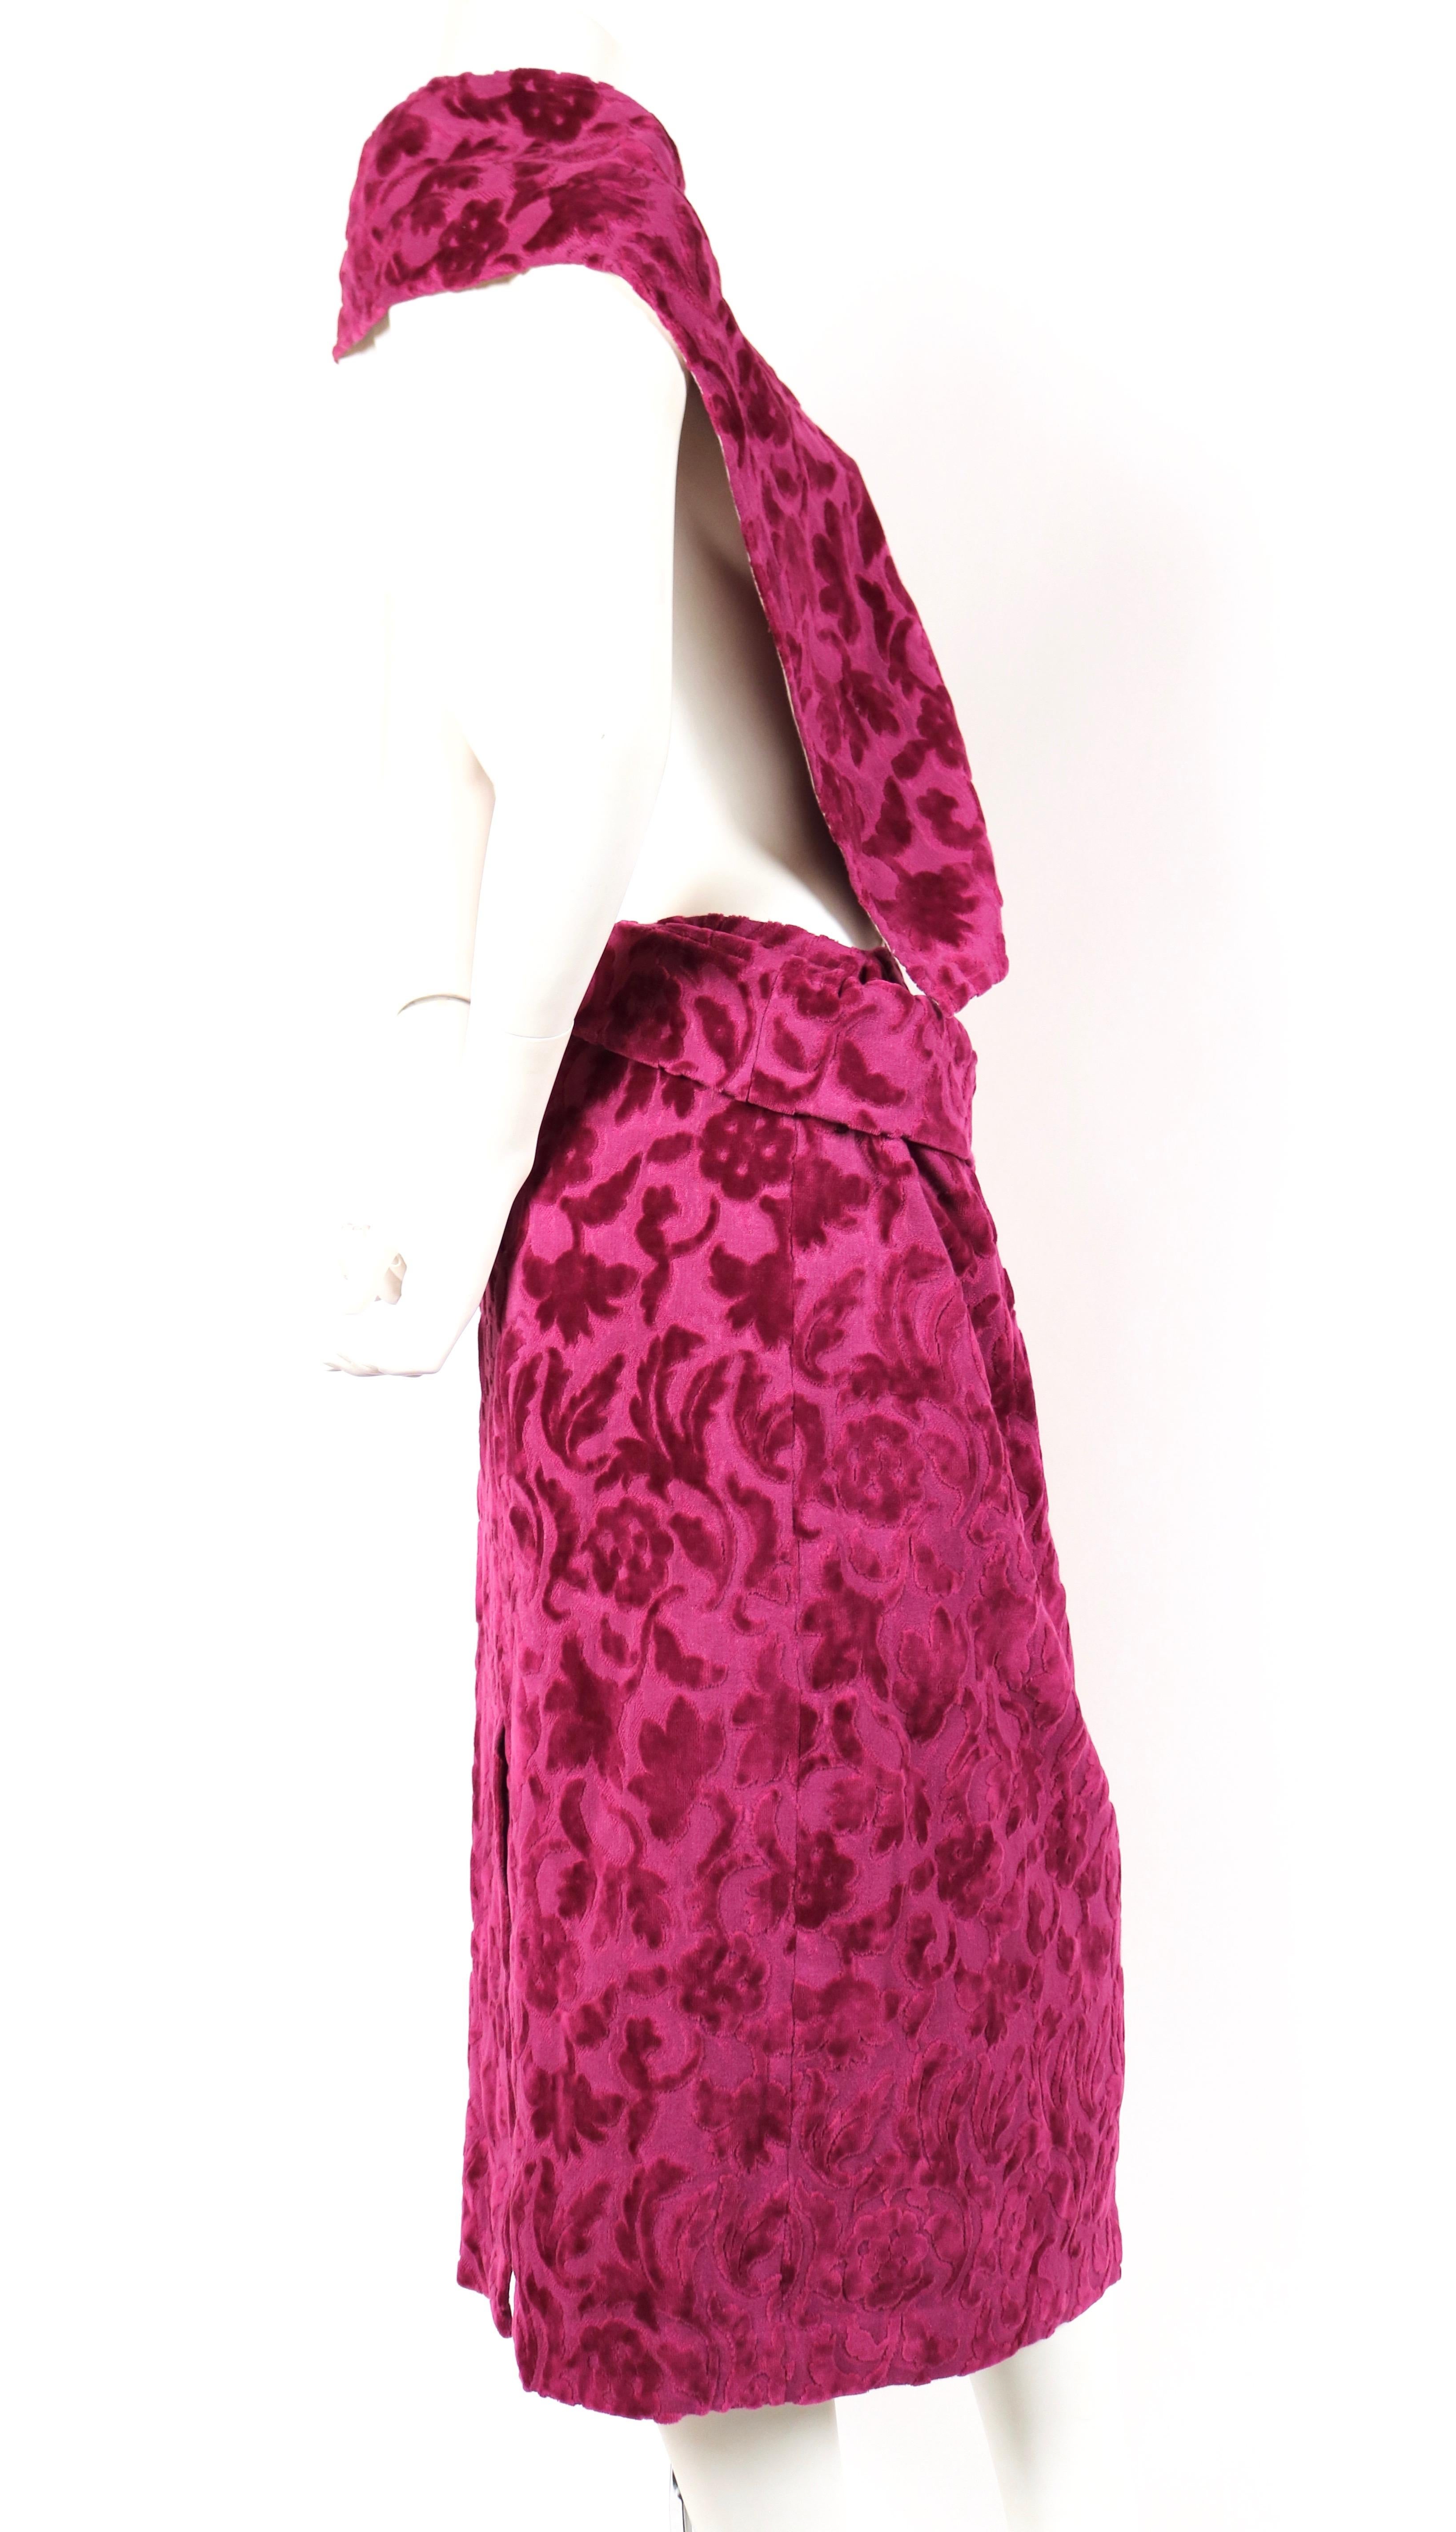 Very rare, magenta-purple flocked draped dress with open back designed by Rei Kawakubo for Comme Des Garcons dating to fall of 1996. Labeled a size 'S'. Waist fits up to 26.5